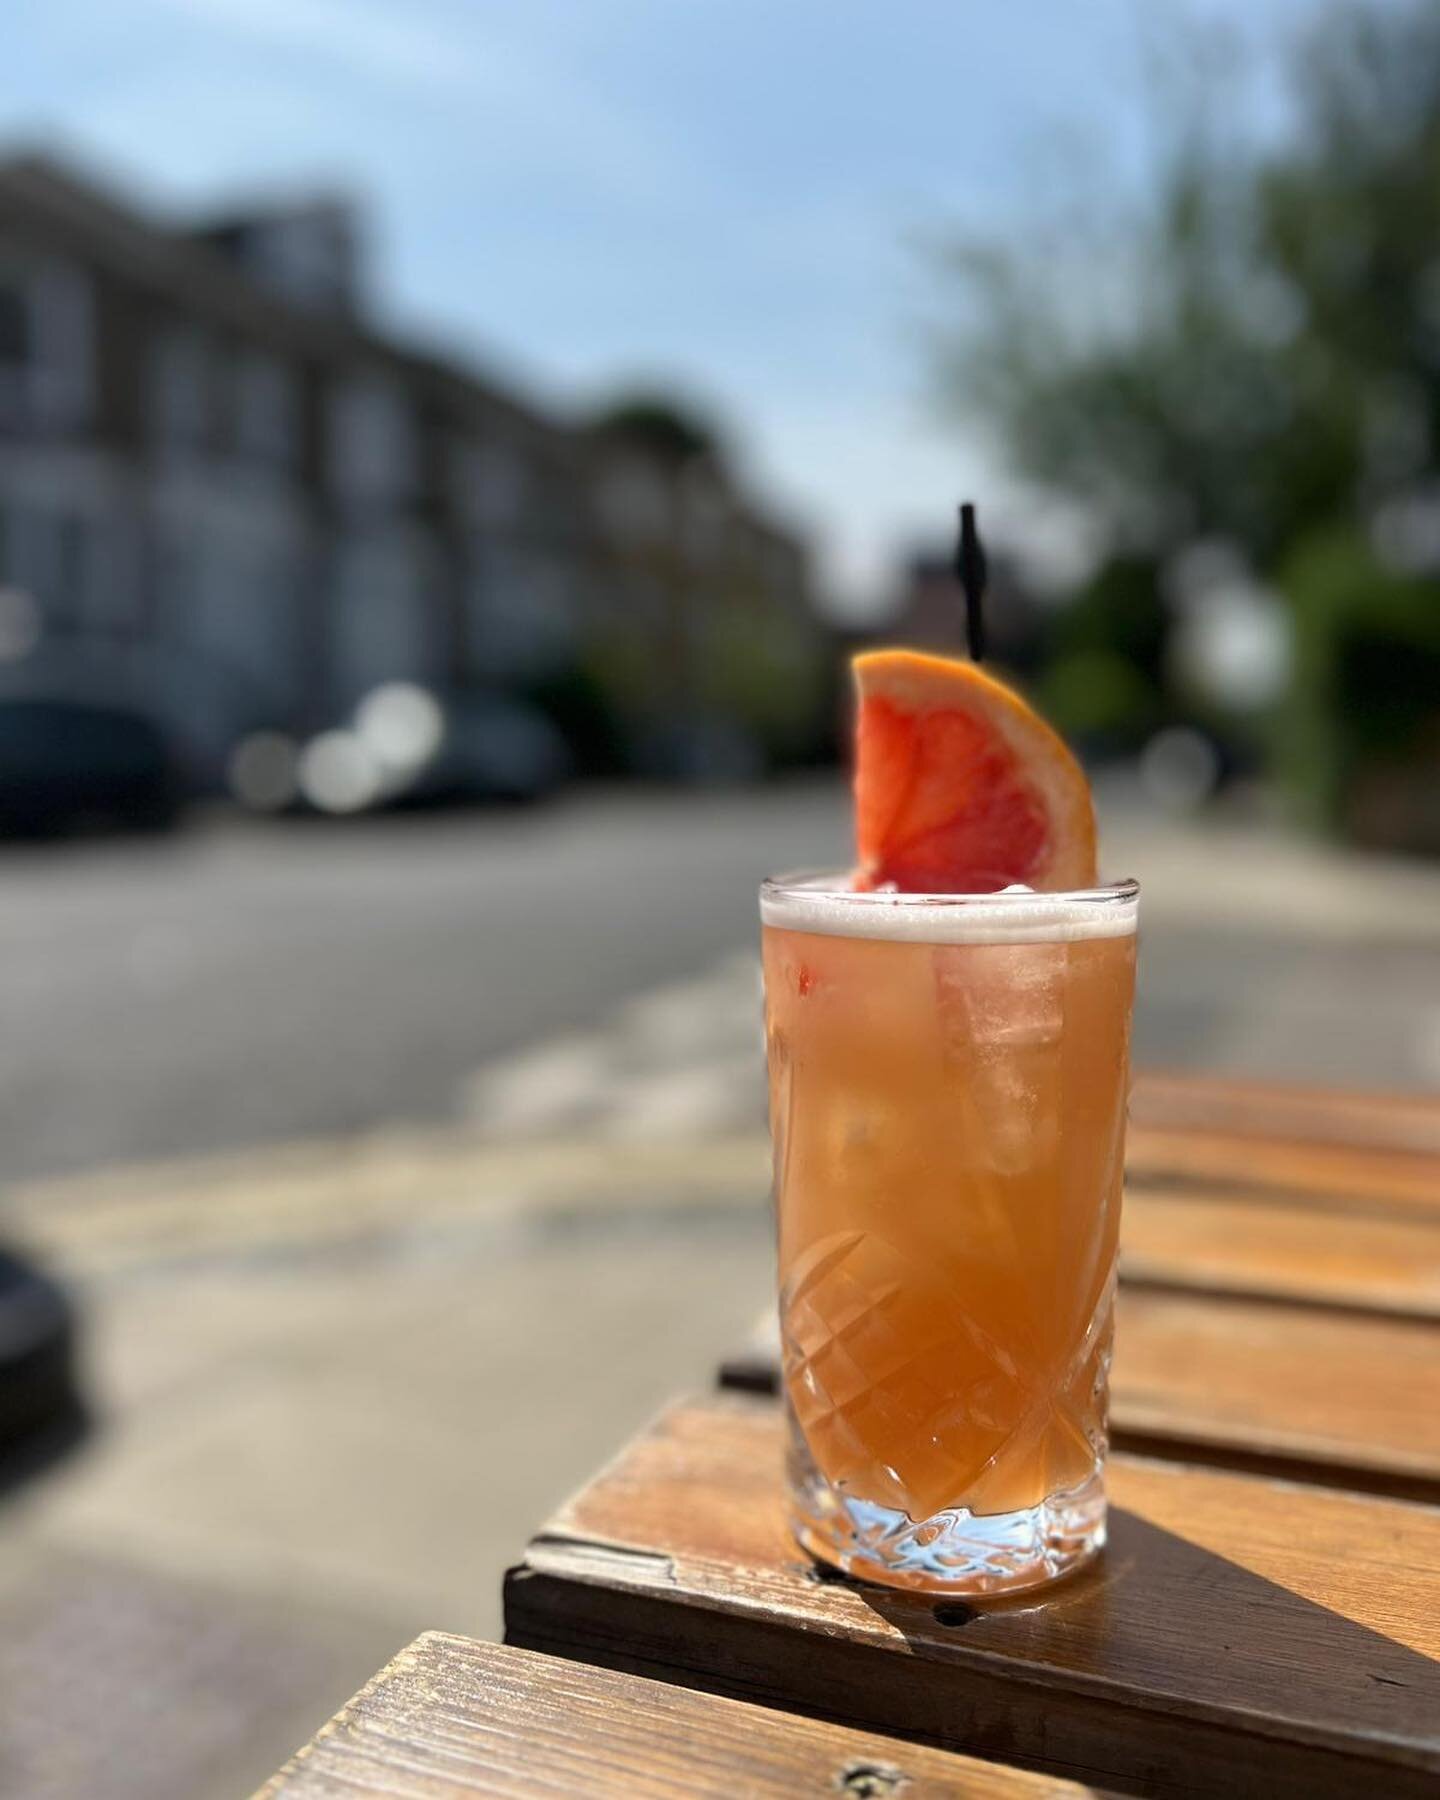 Join us to catch some rays and sink some Paloma&rsquo;s ☀️🍹Kitchen serving till 6pm, cocktails till late ❤️